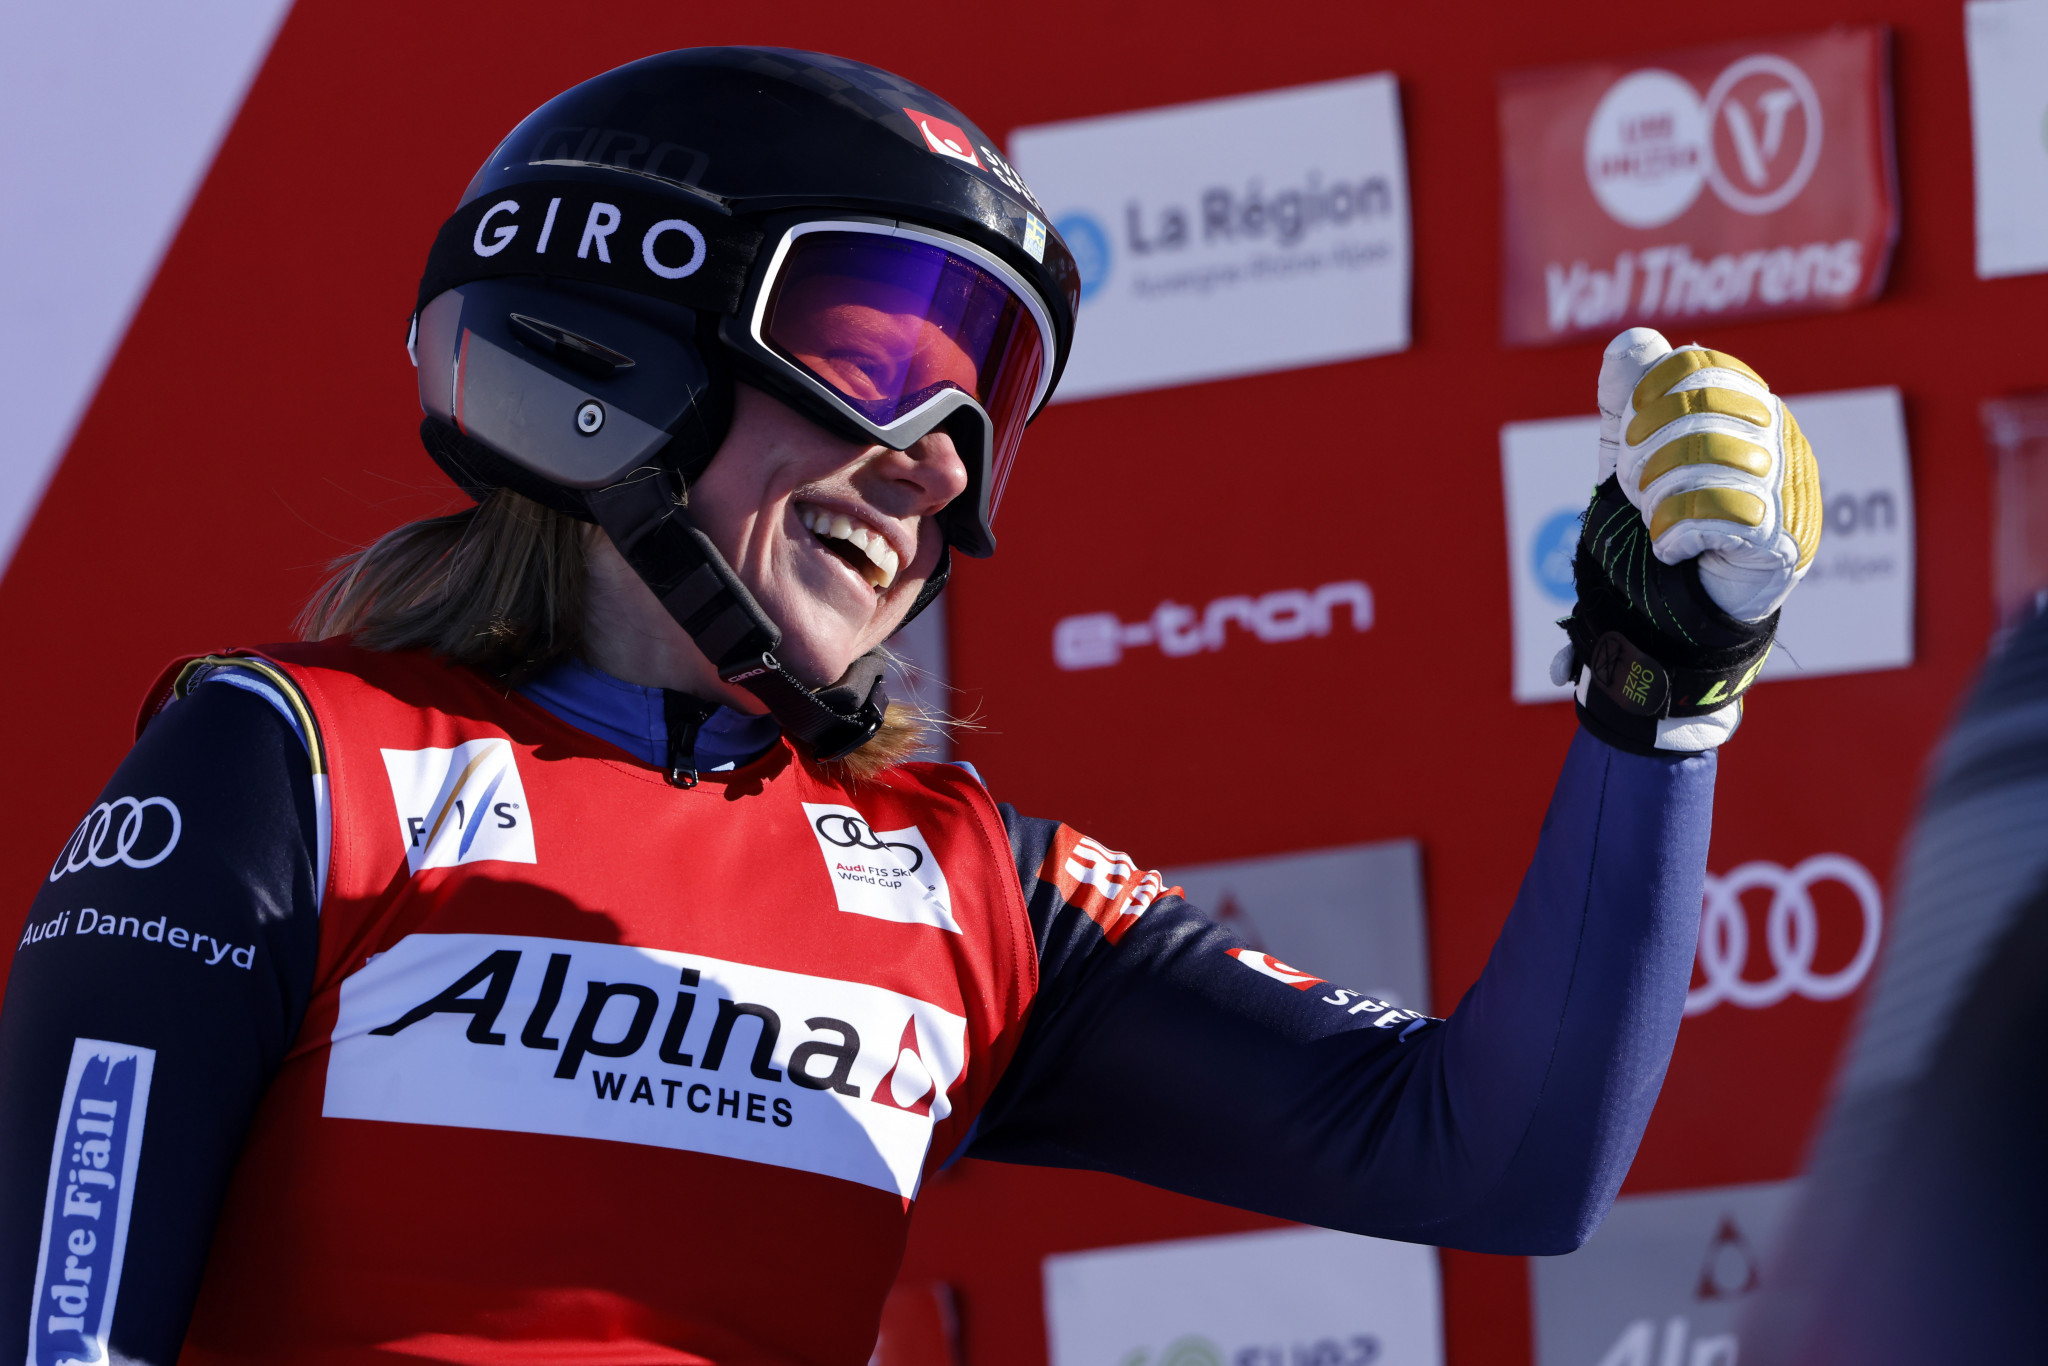 Näslund continues Ski Cross World Cup domination with 17th win in a row